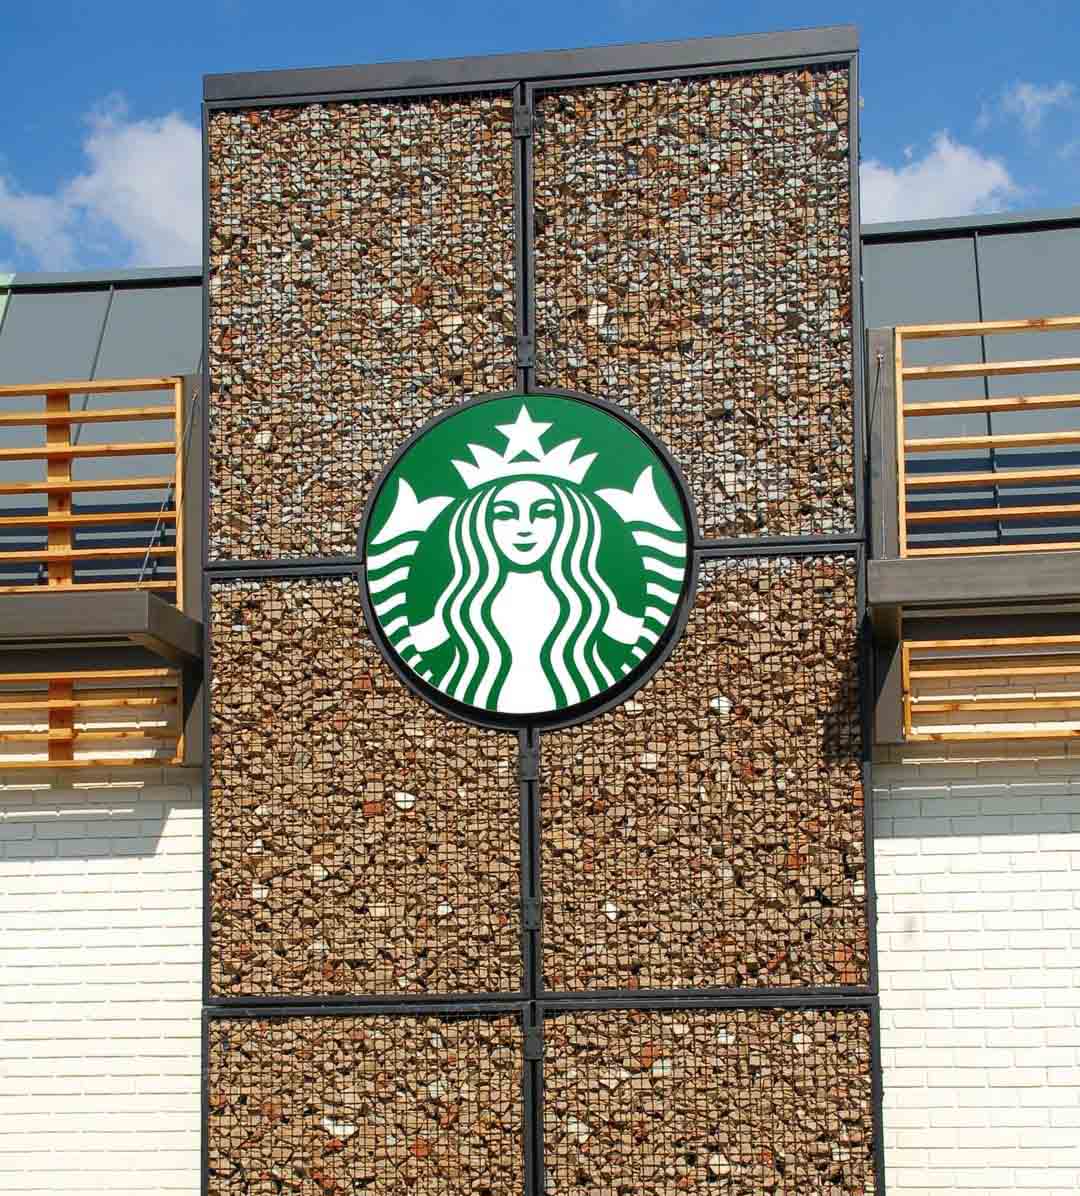 ECO-ROCK® used as decor for the Starbucks sign.